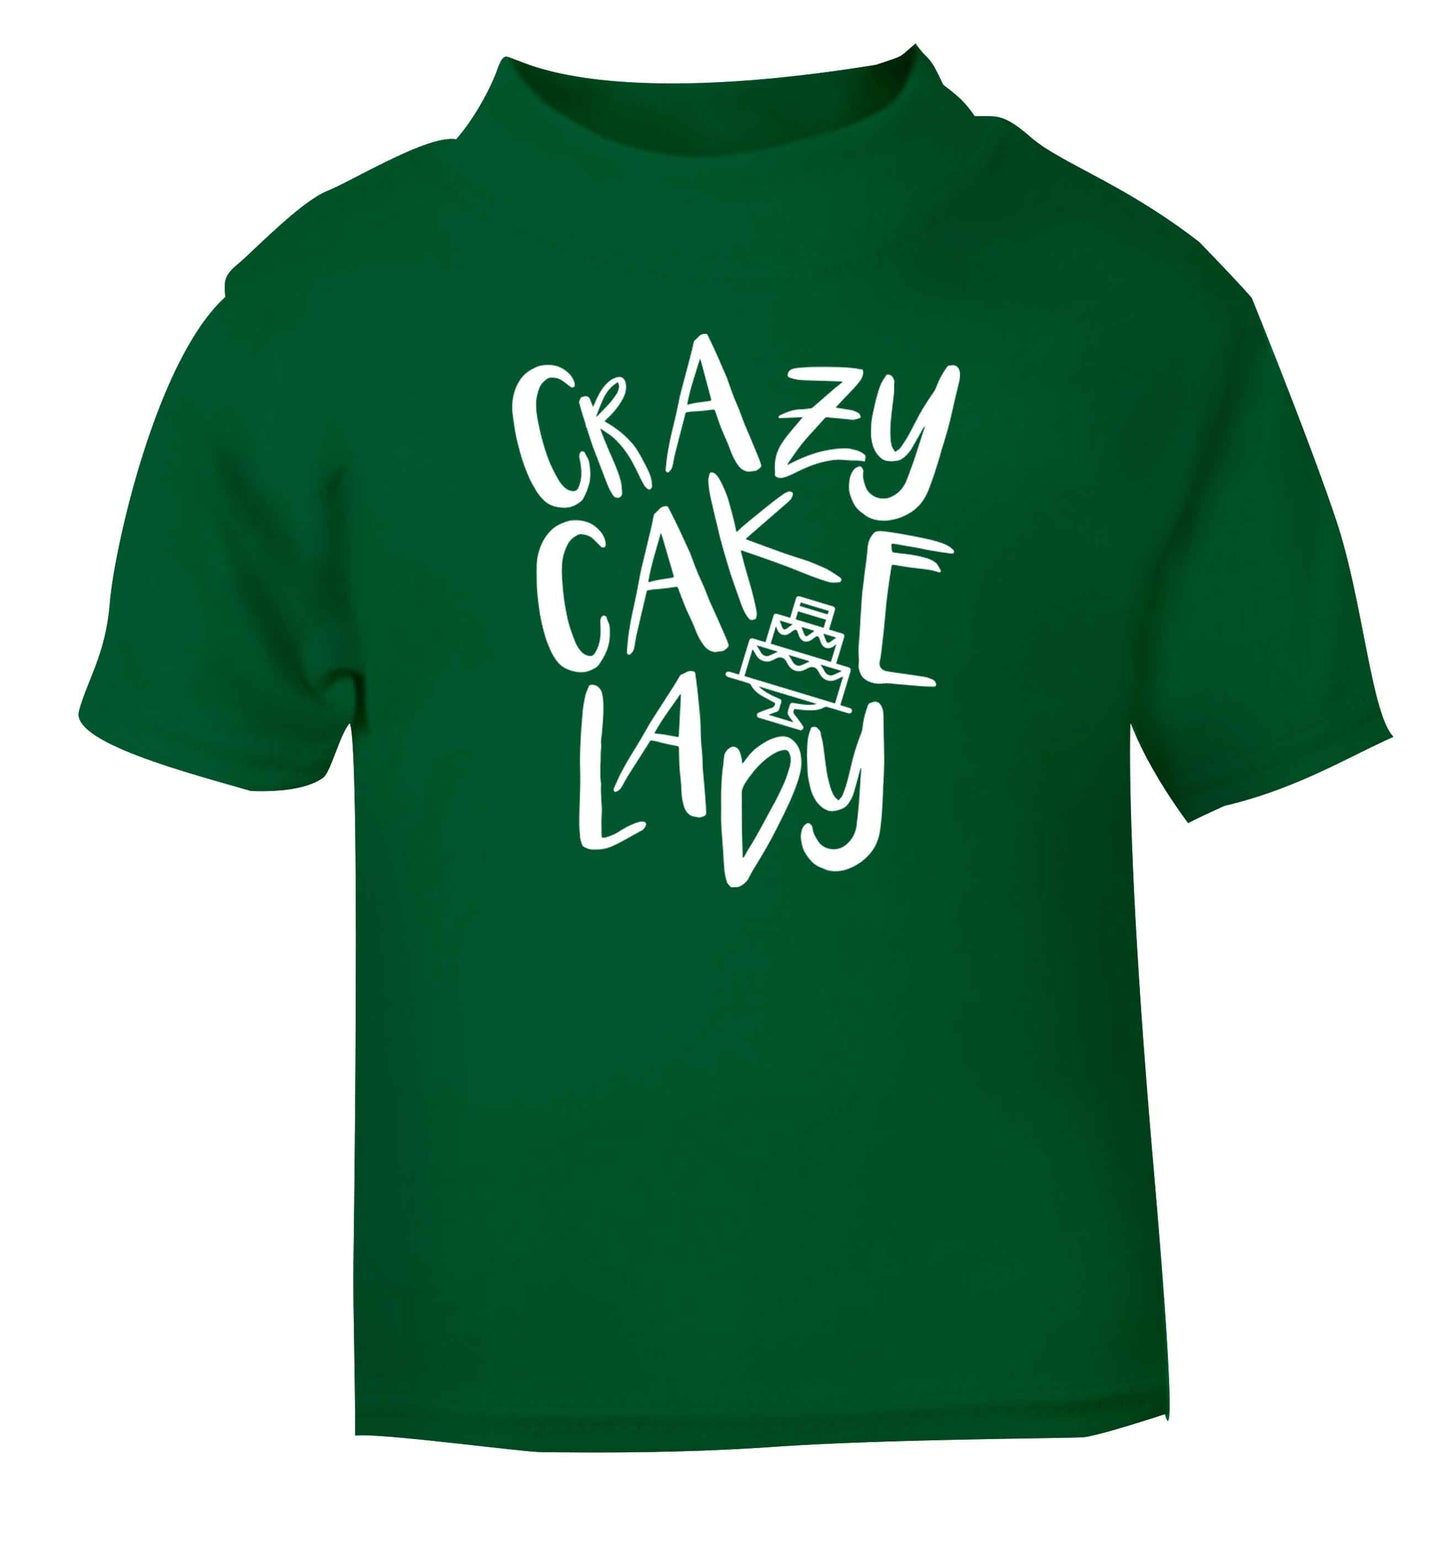 Crazy cake lady green Baby Toddler Tshirt 2 Years